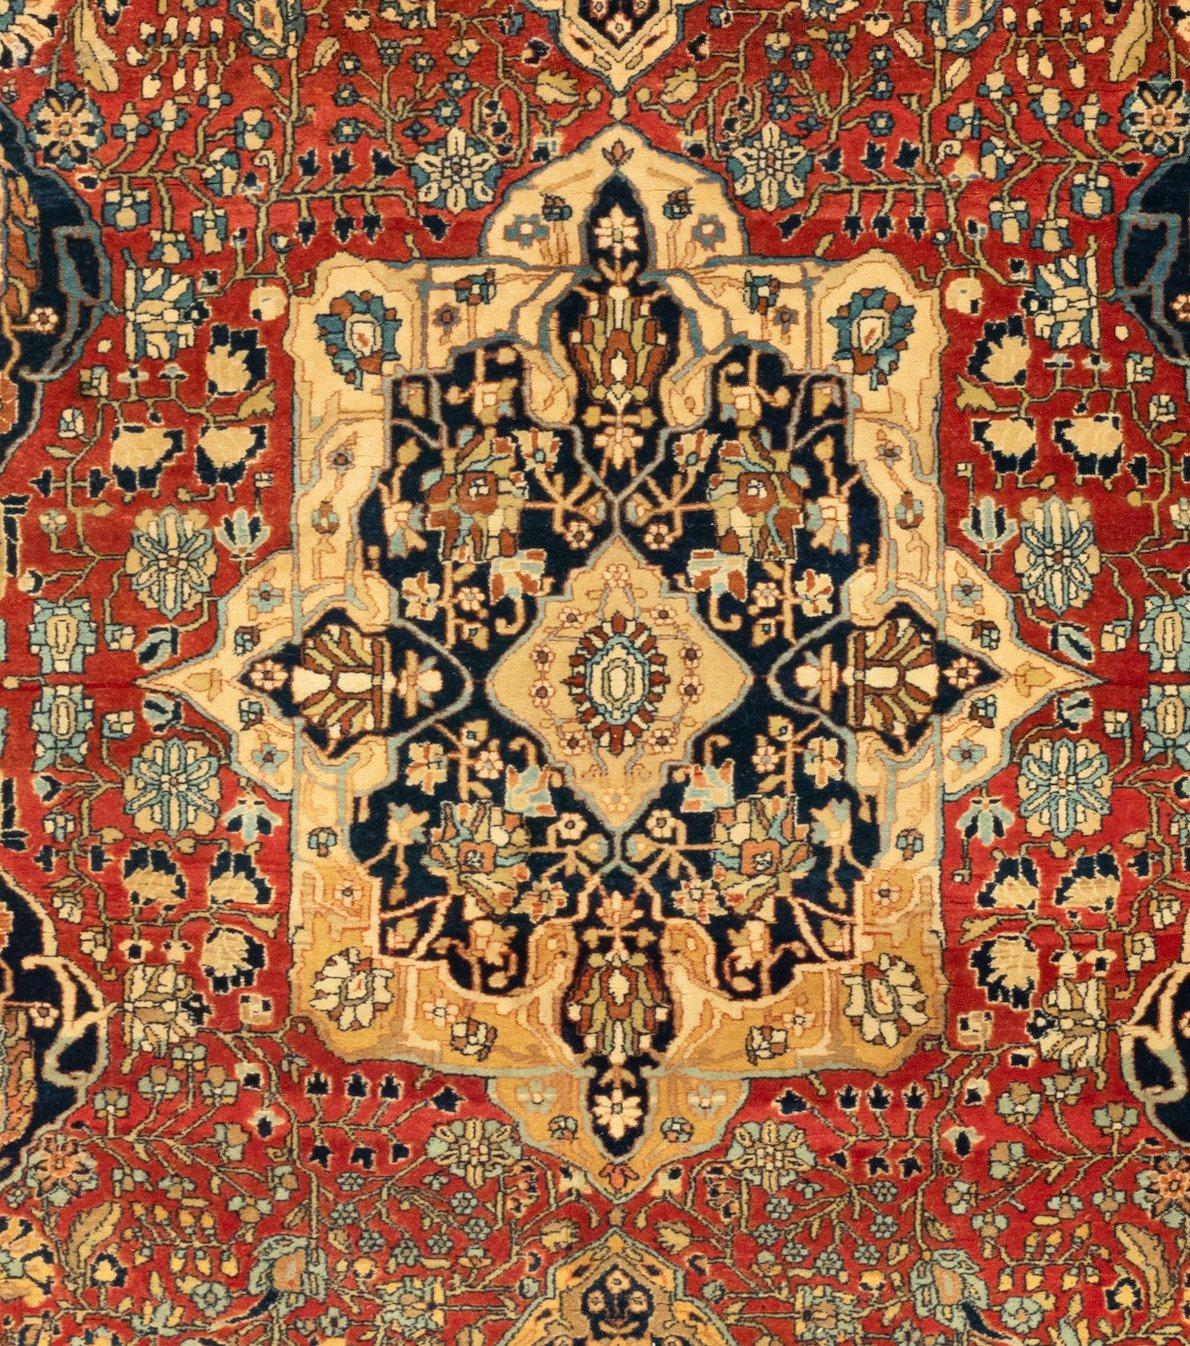 Antique Kashan carpets are among the finest Persian rugs. They are woven in workshops of the city of Kashan, in north central Iran. Kashan was a hub of silk production since the Safavid dynasty, and has created some of the highest quality Persian